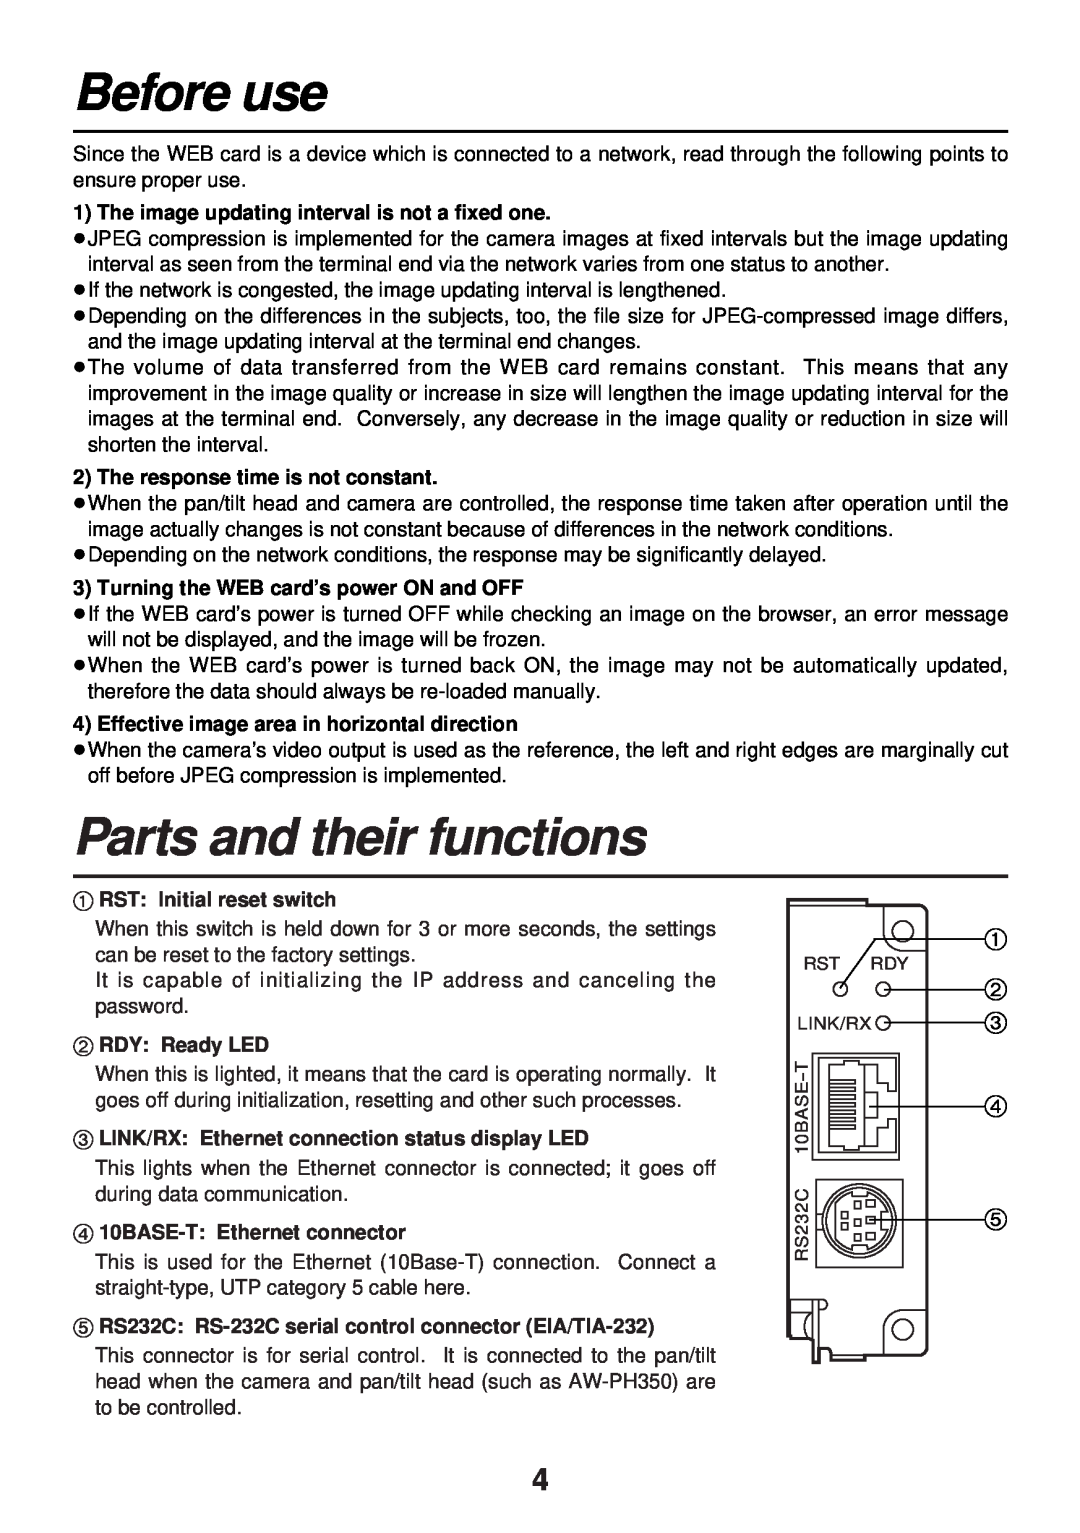 Panasonic AW-PB309P manual Before use, Parts and their functions, The image updating interval is not a fixed one 